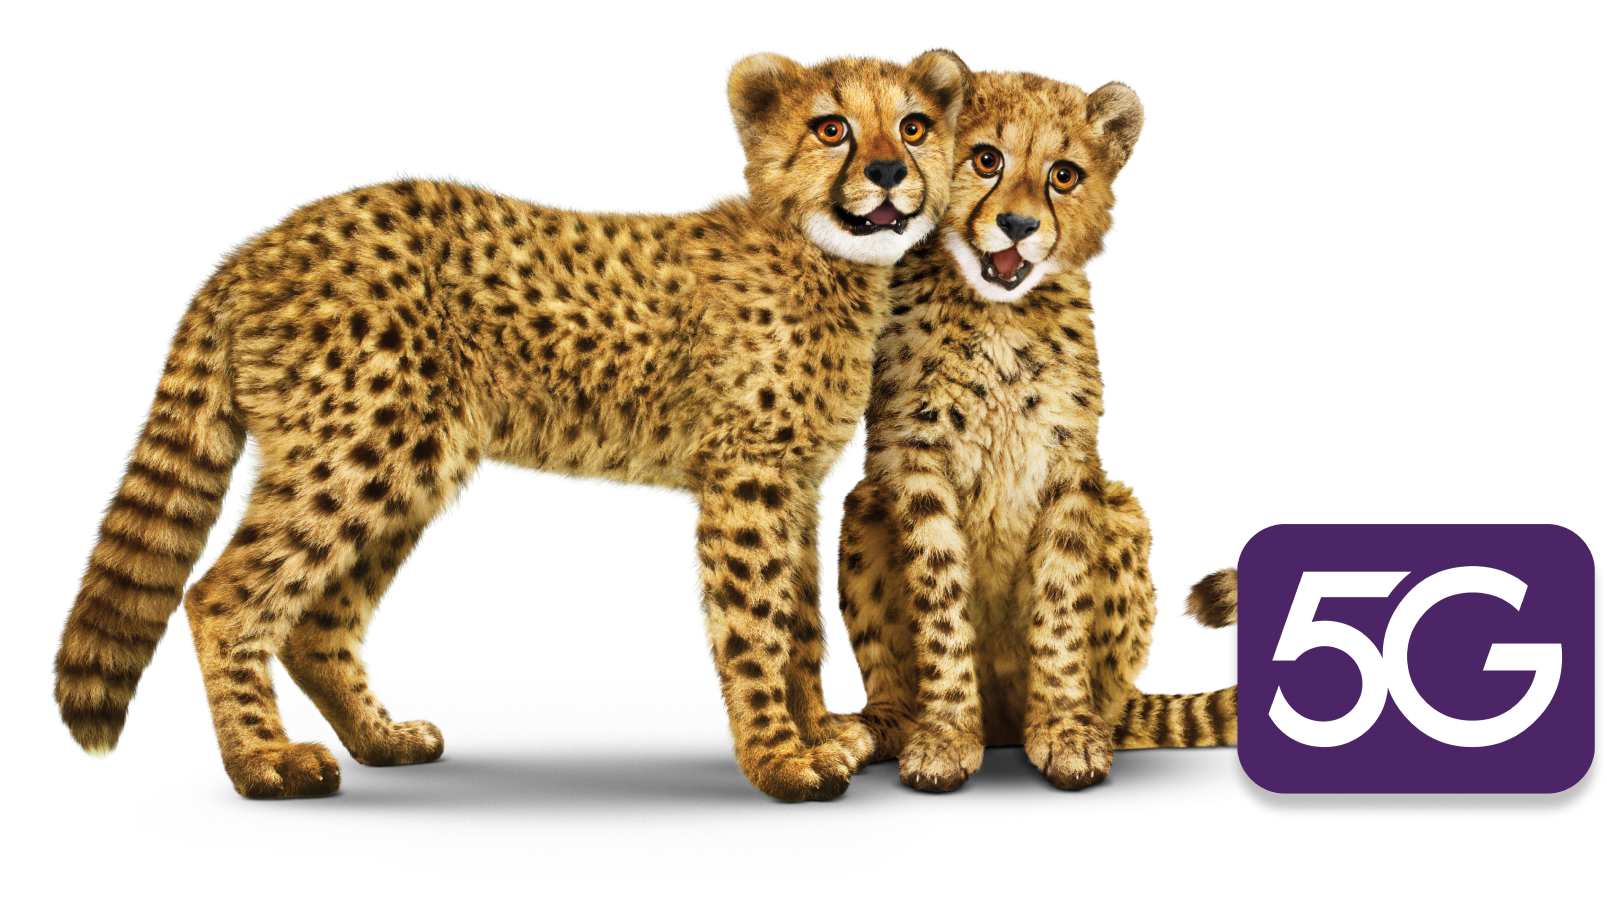 Two cheetah cubs with a 5G logo, symbolizing the blazing-fast speeds of the TELUS network.